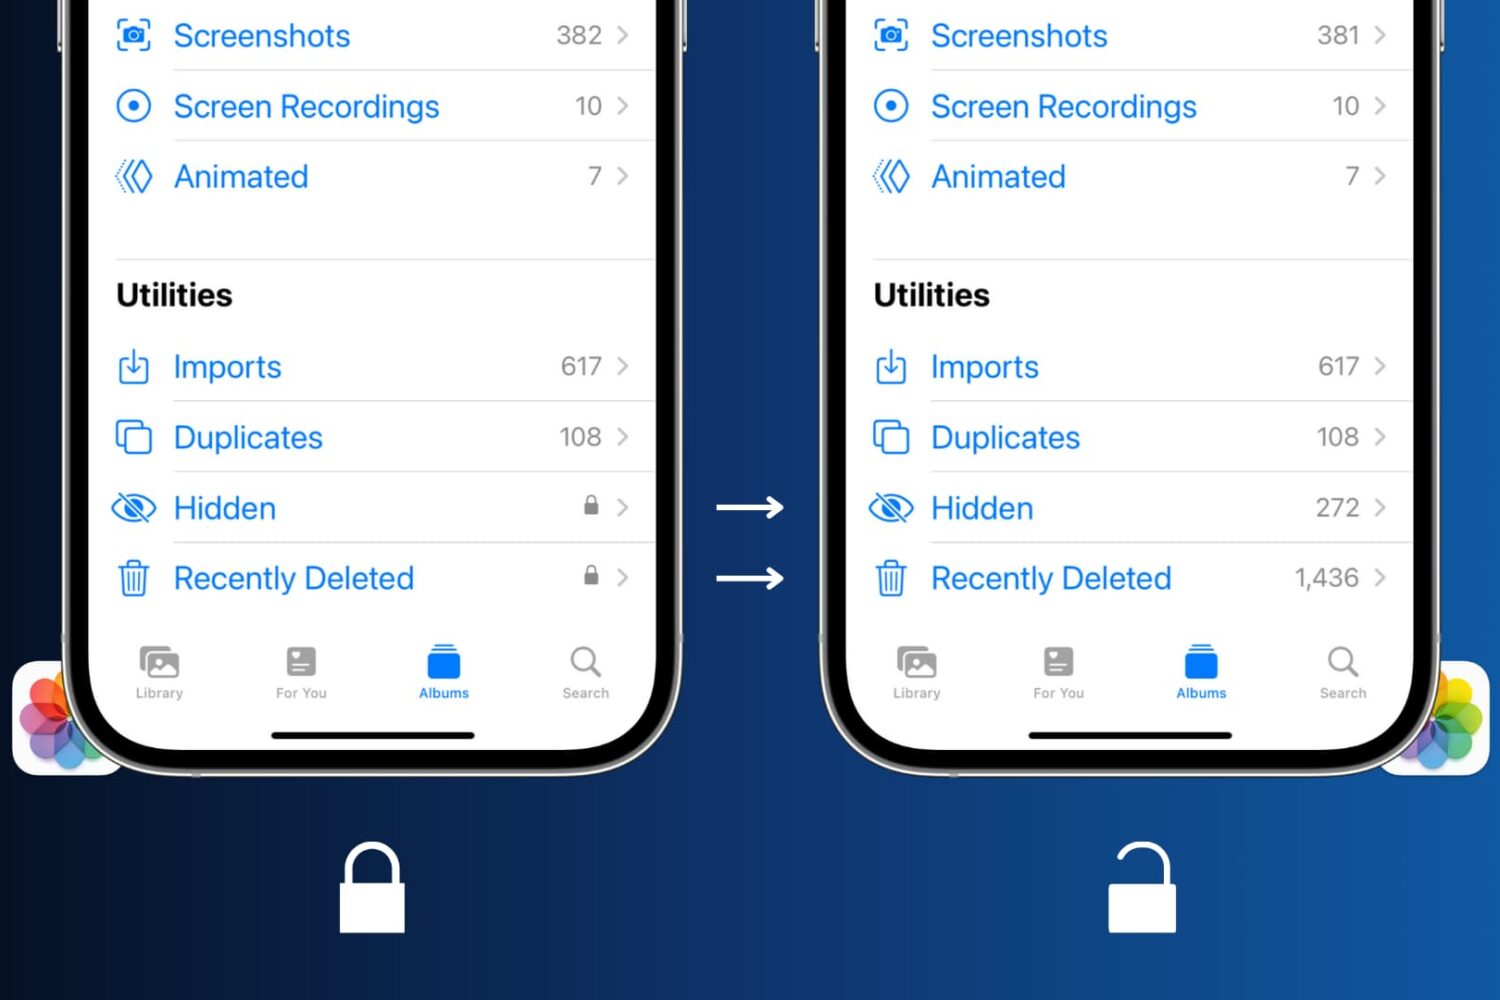 Two iPhone mockups with one showing locked Hidden and Recently Deleted sections in the Photos app while the other showing them as unlocked